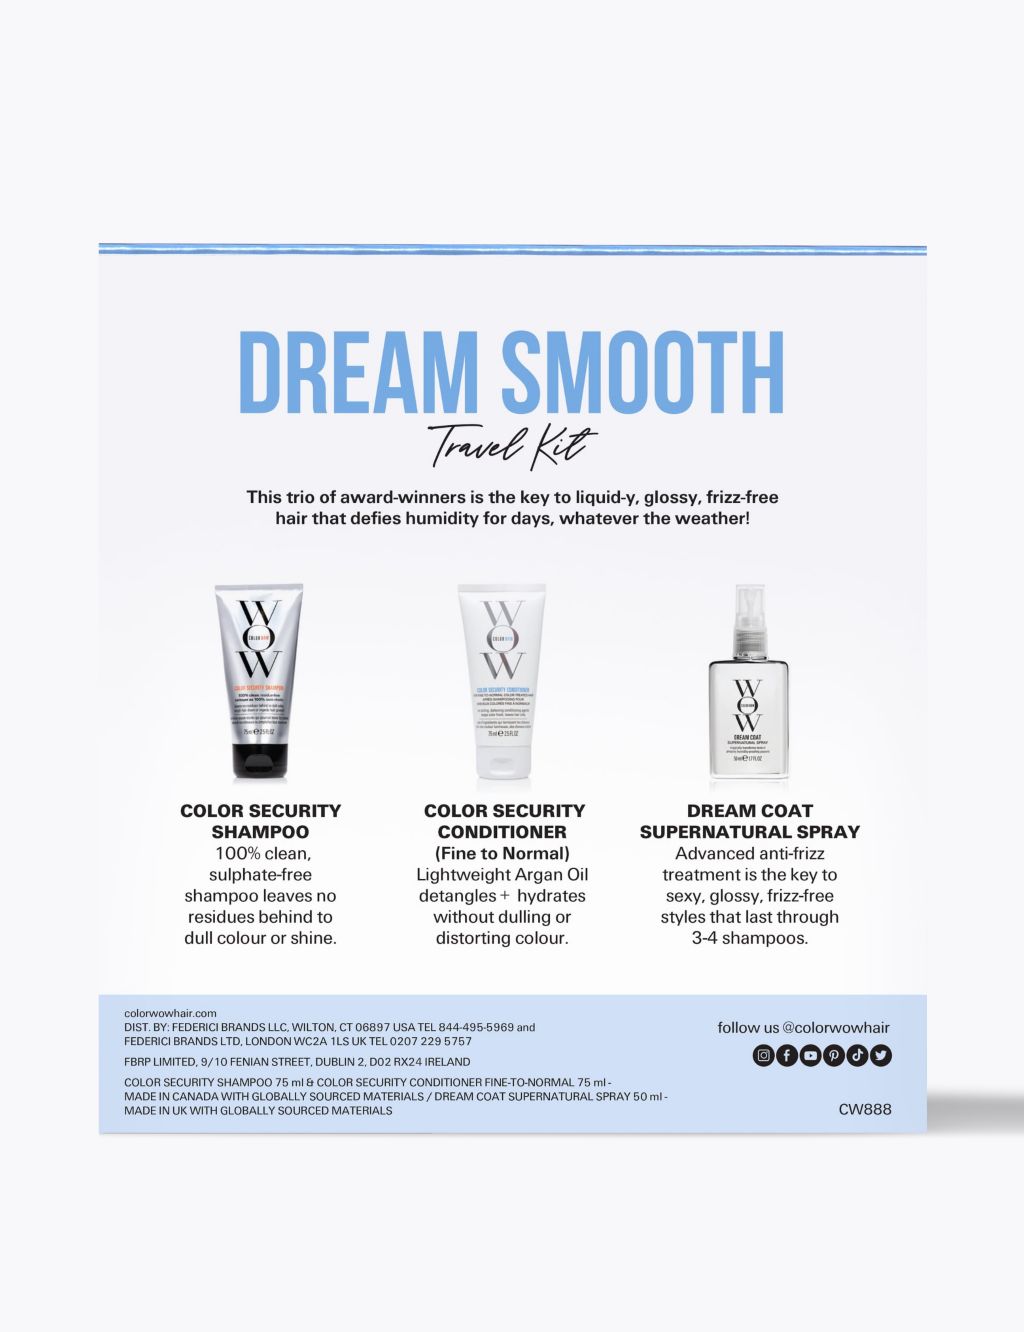 Dream Smooth Travel Kit 1 of 3